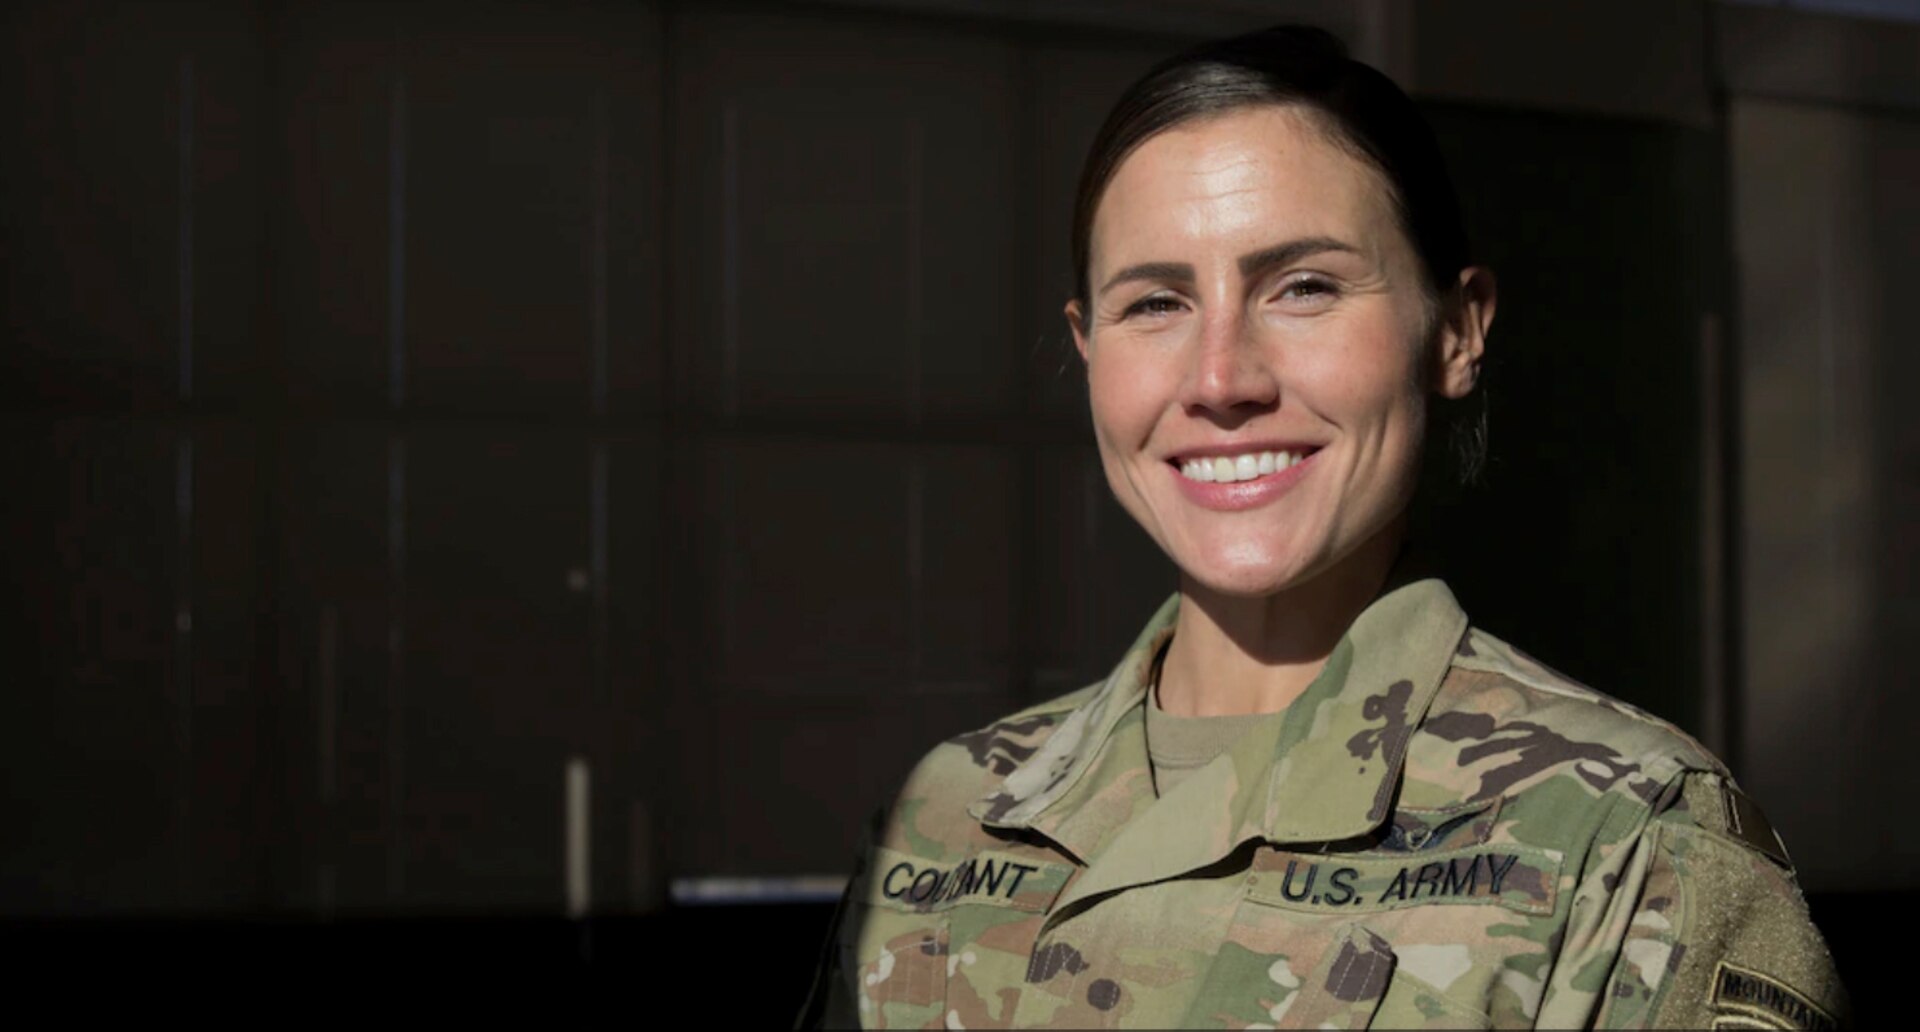 The Connecticut National Guard's first female infantry officer, 2nd Lt. Jocelyn Coutant, at the Maj. Gen. Maurice Rose Armed Forces Reserve Center, Middletown, Connecticut, Dec. 23, 2020. Coutant completed Infantry Basic Officer Leader Course March 4, 2021.